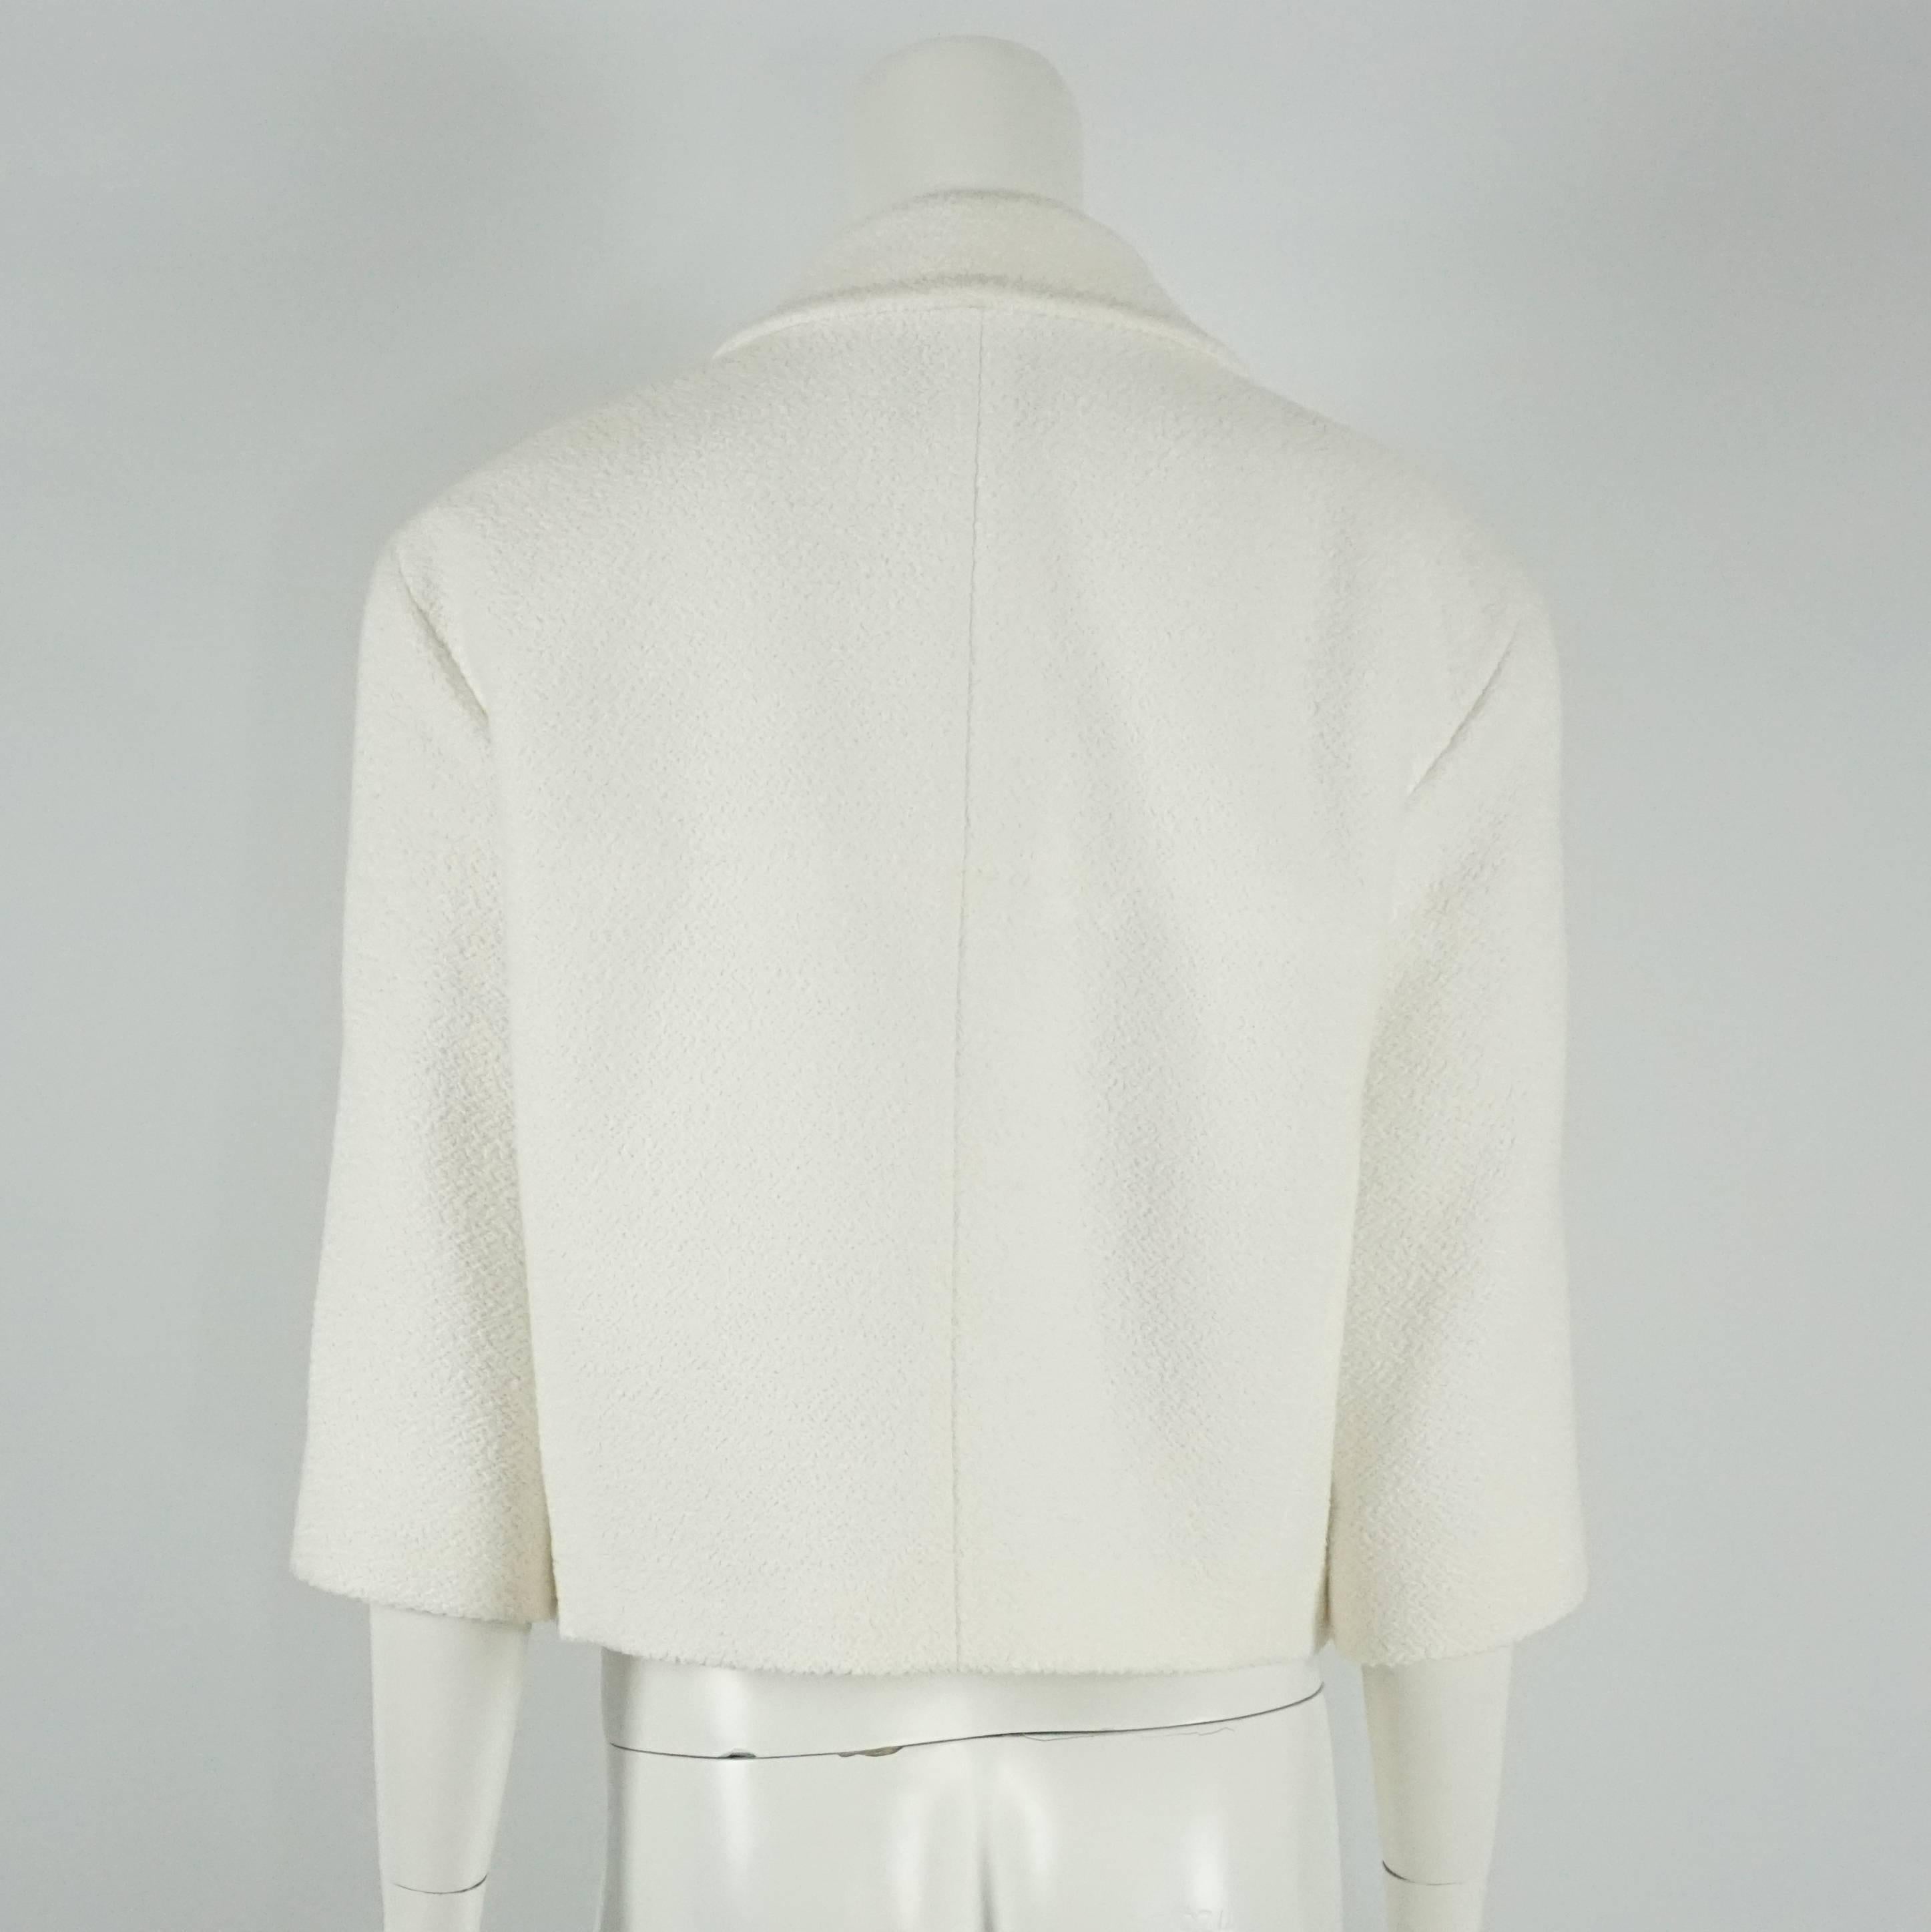 Gray Chanel White Cotton/Silk Textured Short Jacket with Pearl Buttons - 44  